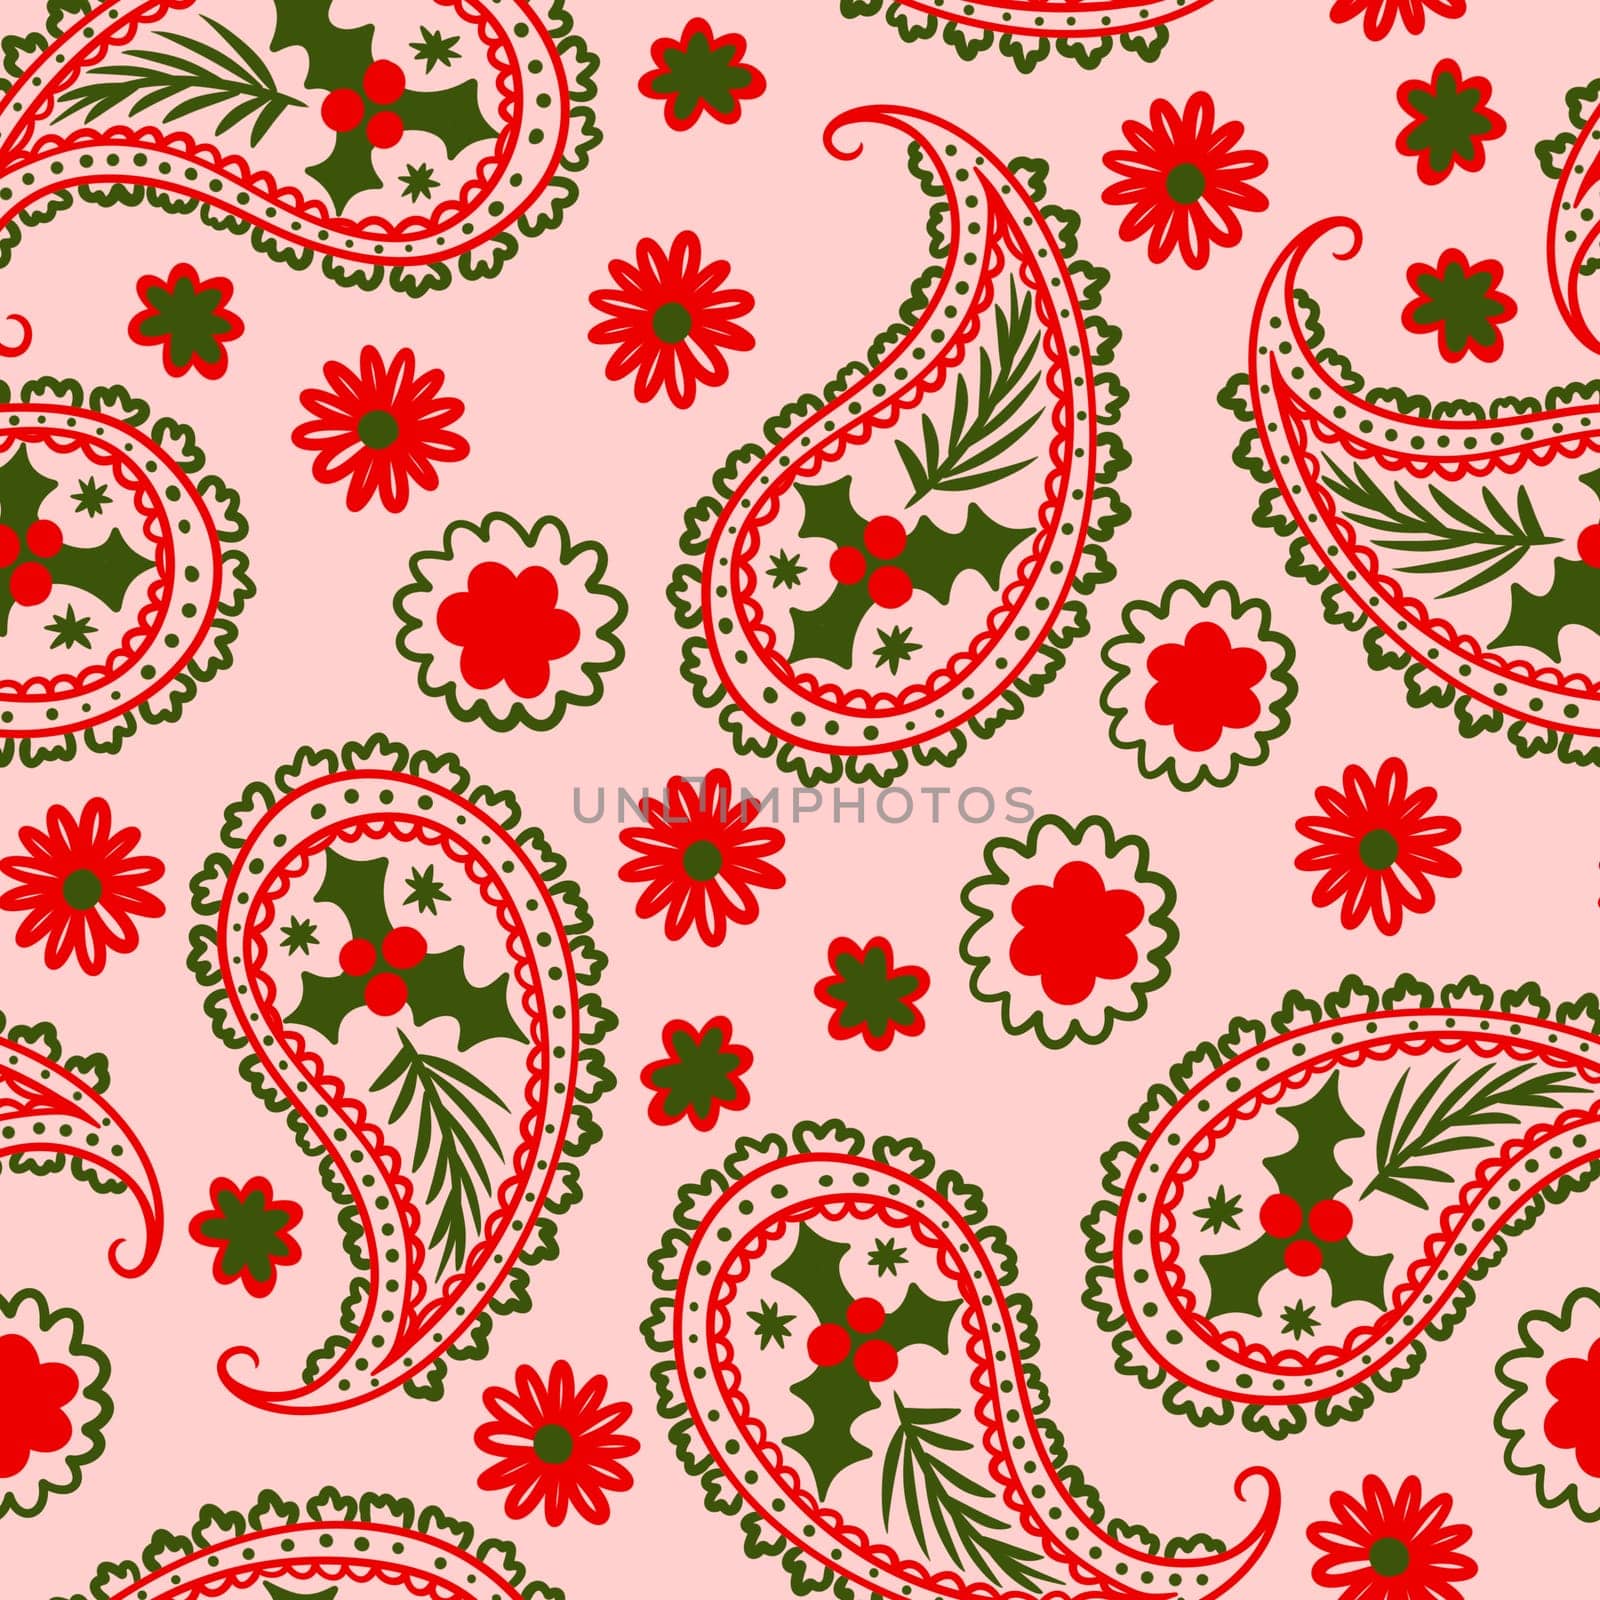 Hand drawn seamless pattern with Christmas winter elements in red green pink, Indian paisley traditional retro vintage holly holiday plant design. Bright colorful print for celebration decoration wrapping paper, merry christmas art